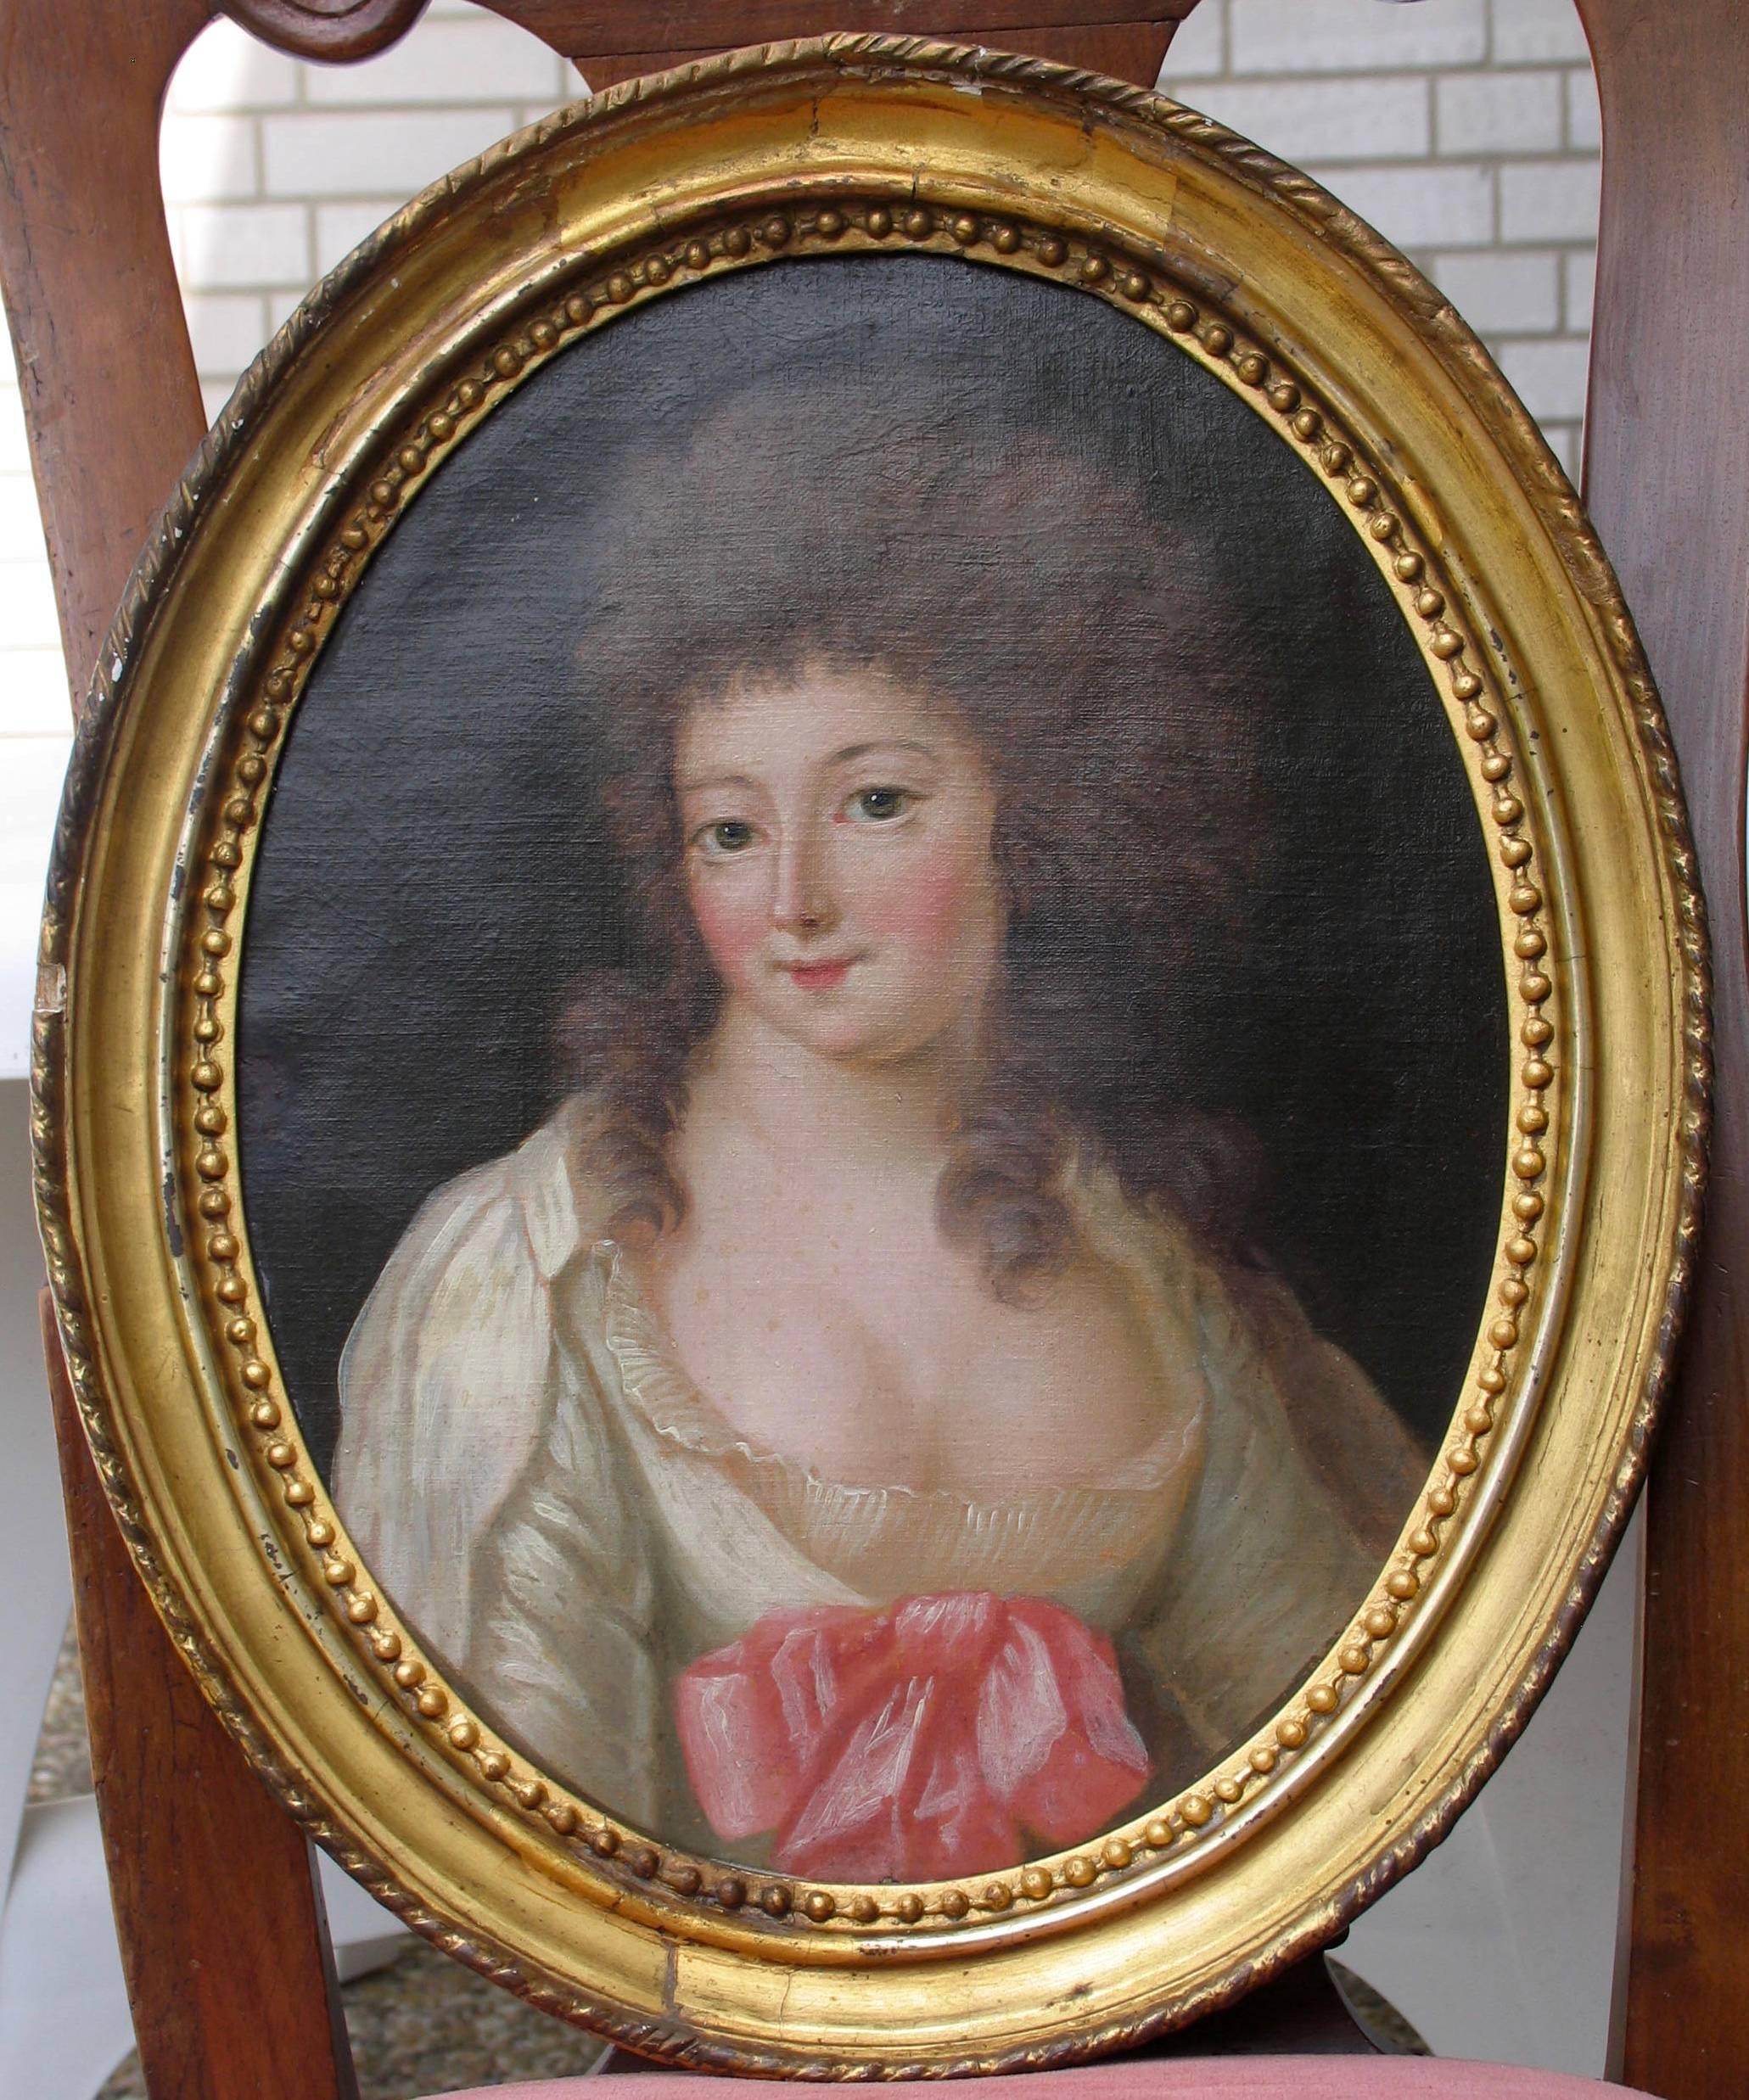 A pair of 18th century portrait paintings of a lady, France. The paintings may have been part of a set of four representing the Four Seasons. The painting showing the lady wearing a fur hat and scarf would be the representation of winter, whereas